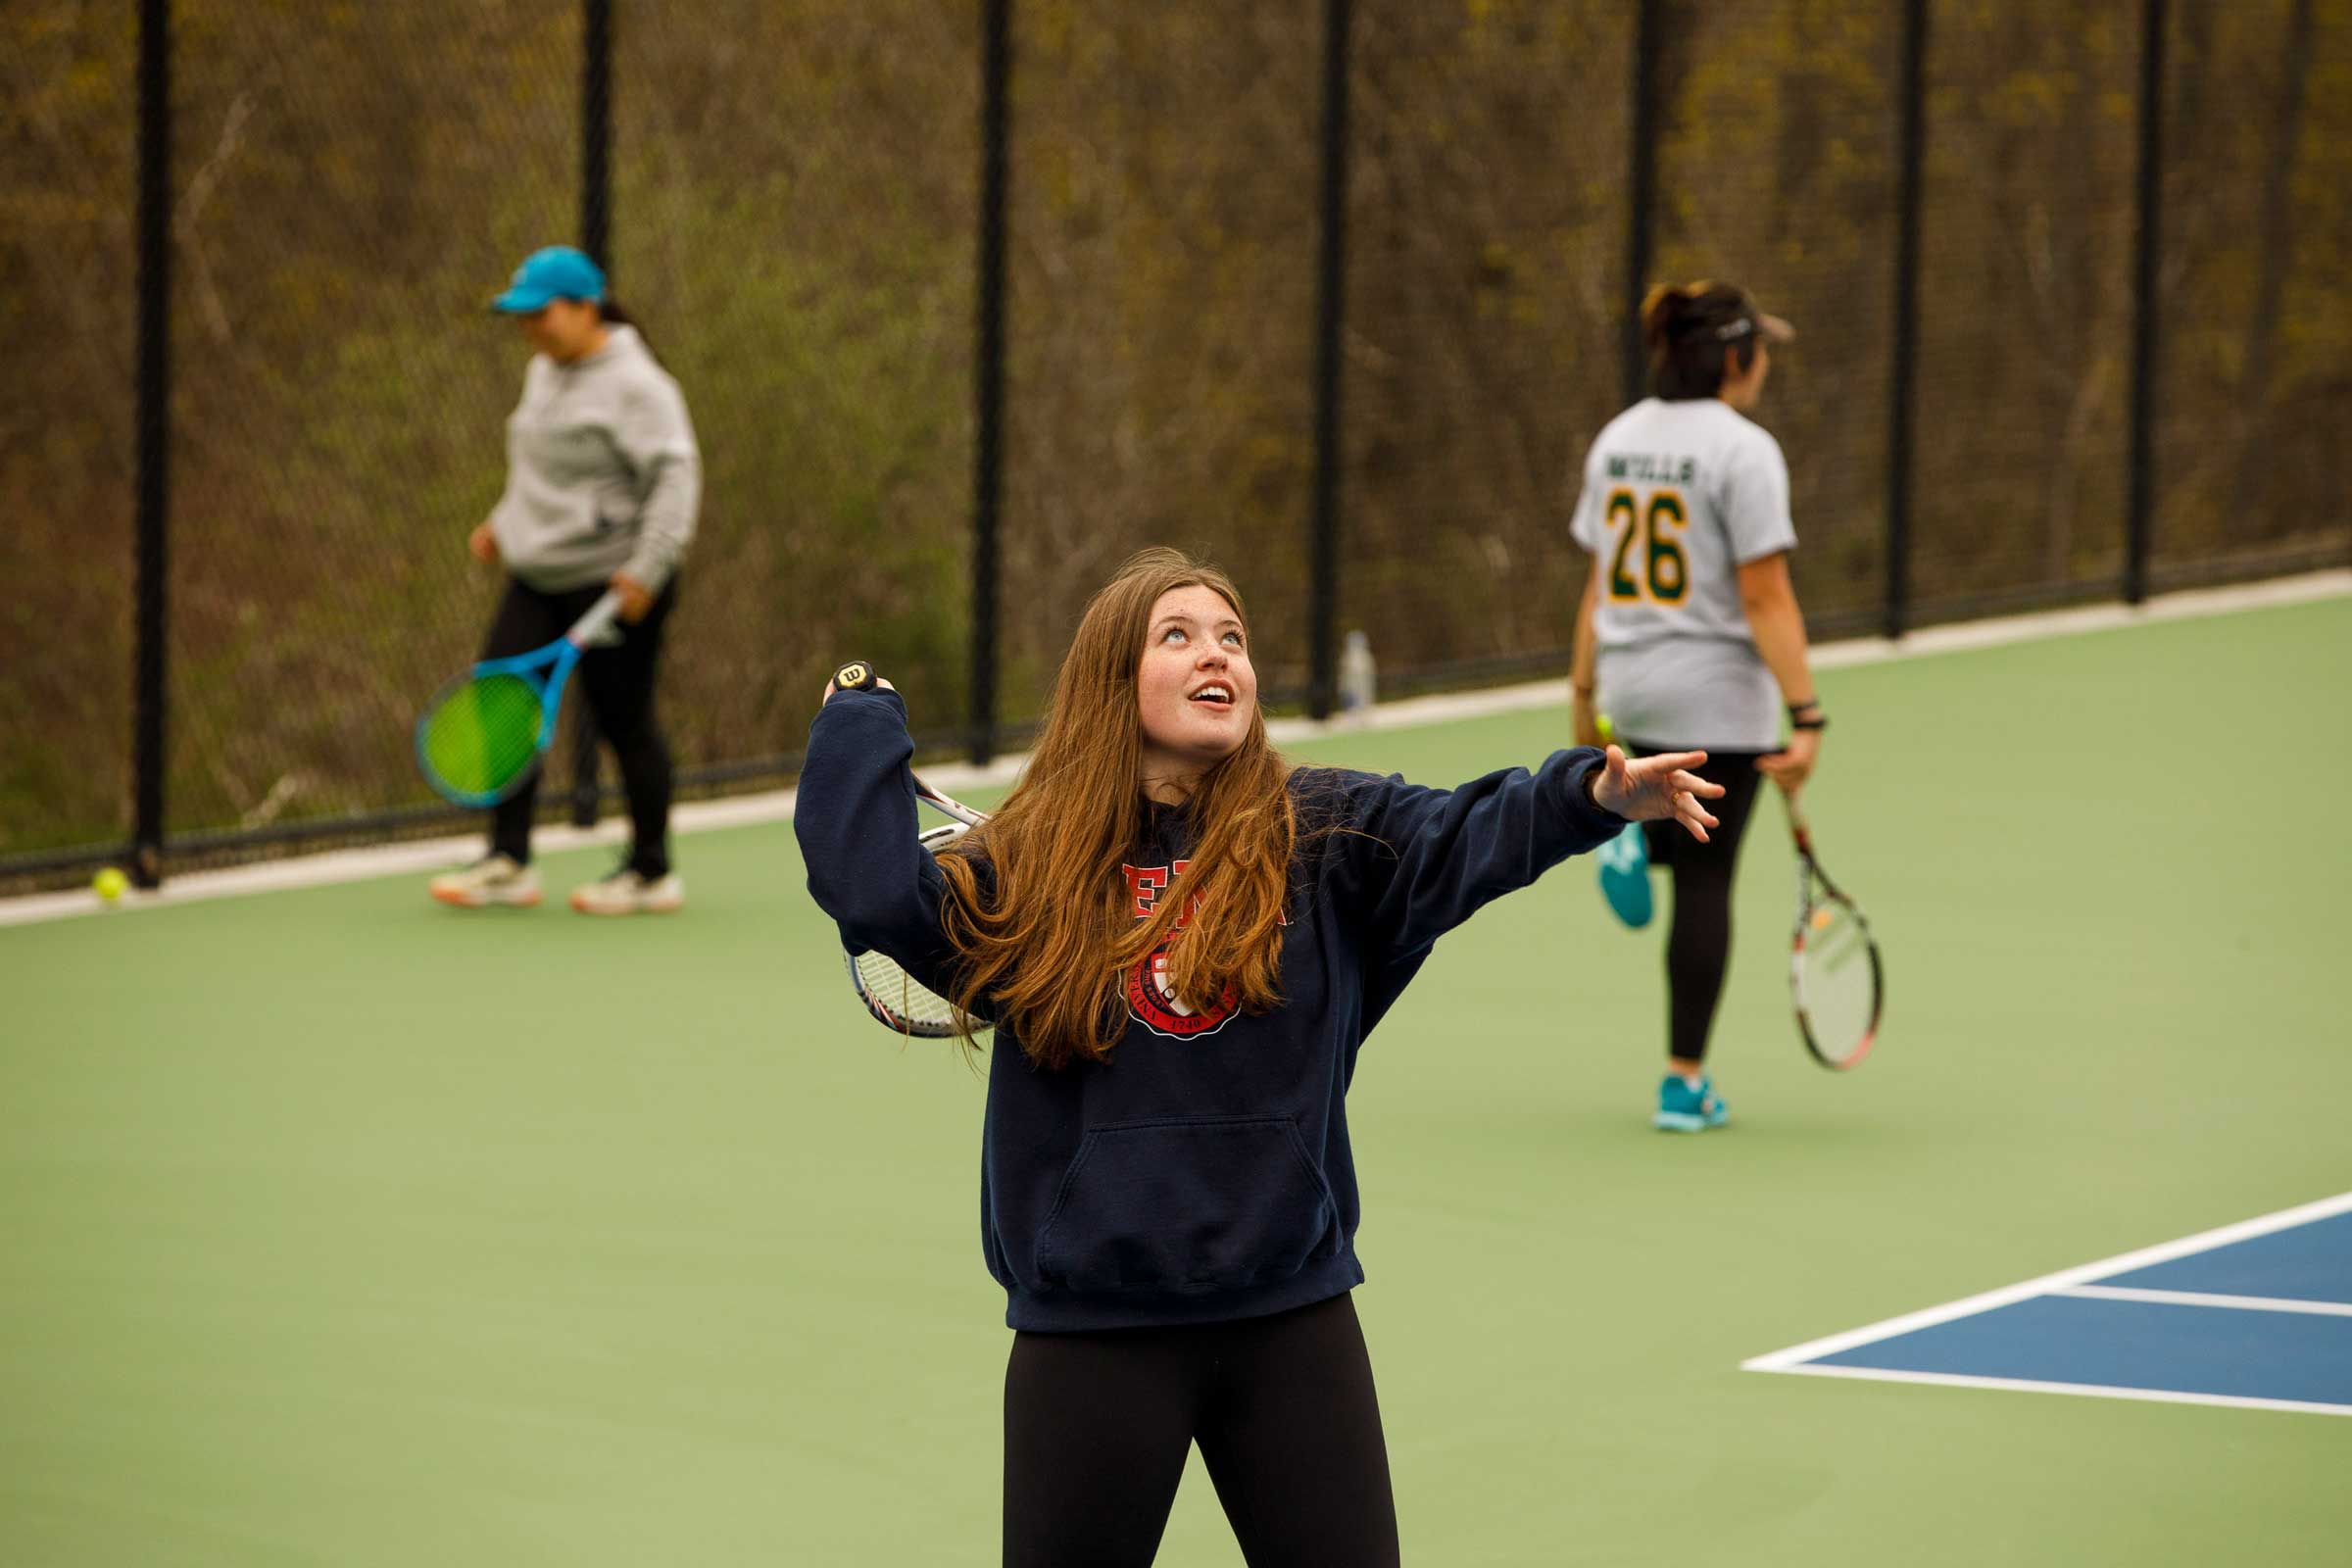 A student practices on tennis courts at Forman.